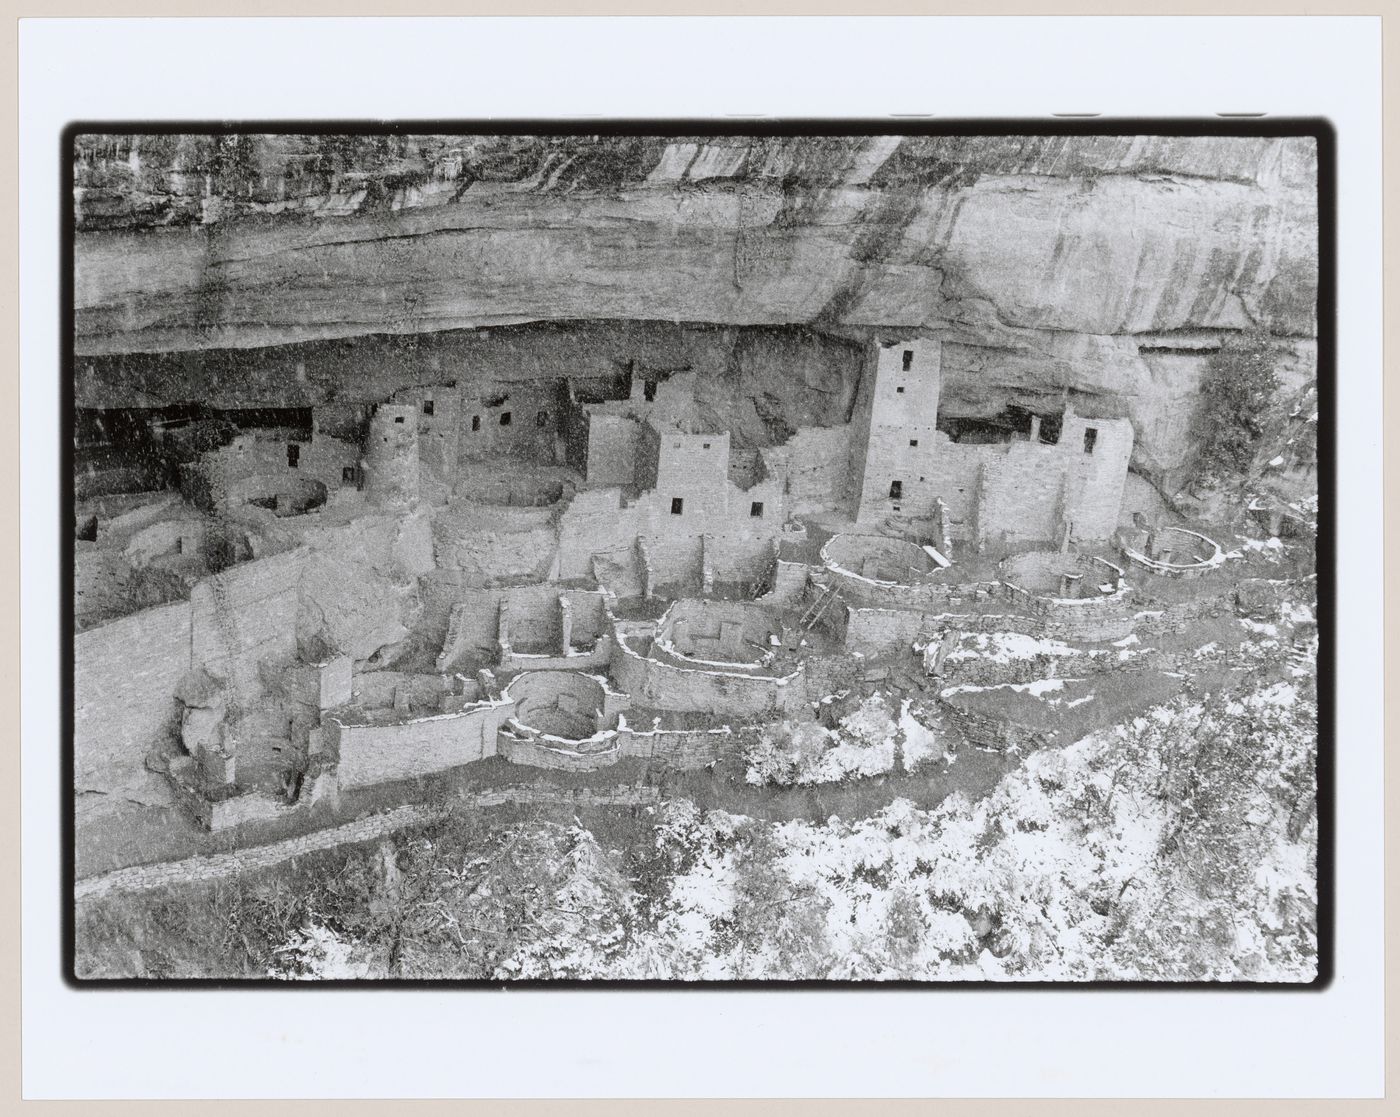 Photograph of Cliff Palace in Mesa Verde National Park, Colorado for About None Conscious Architecture